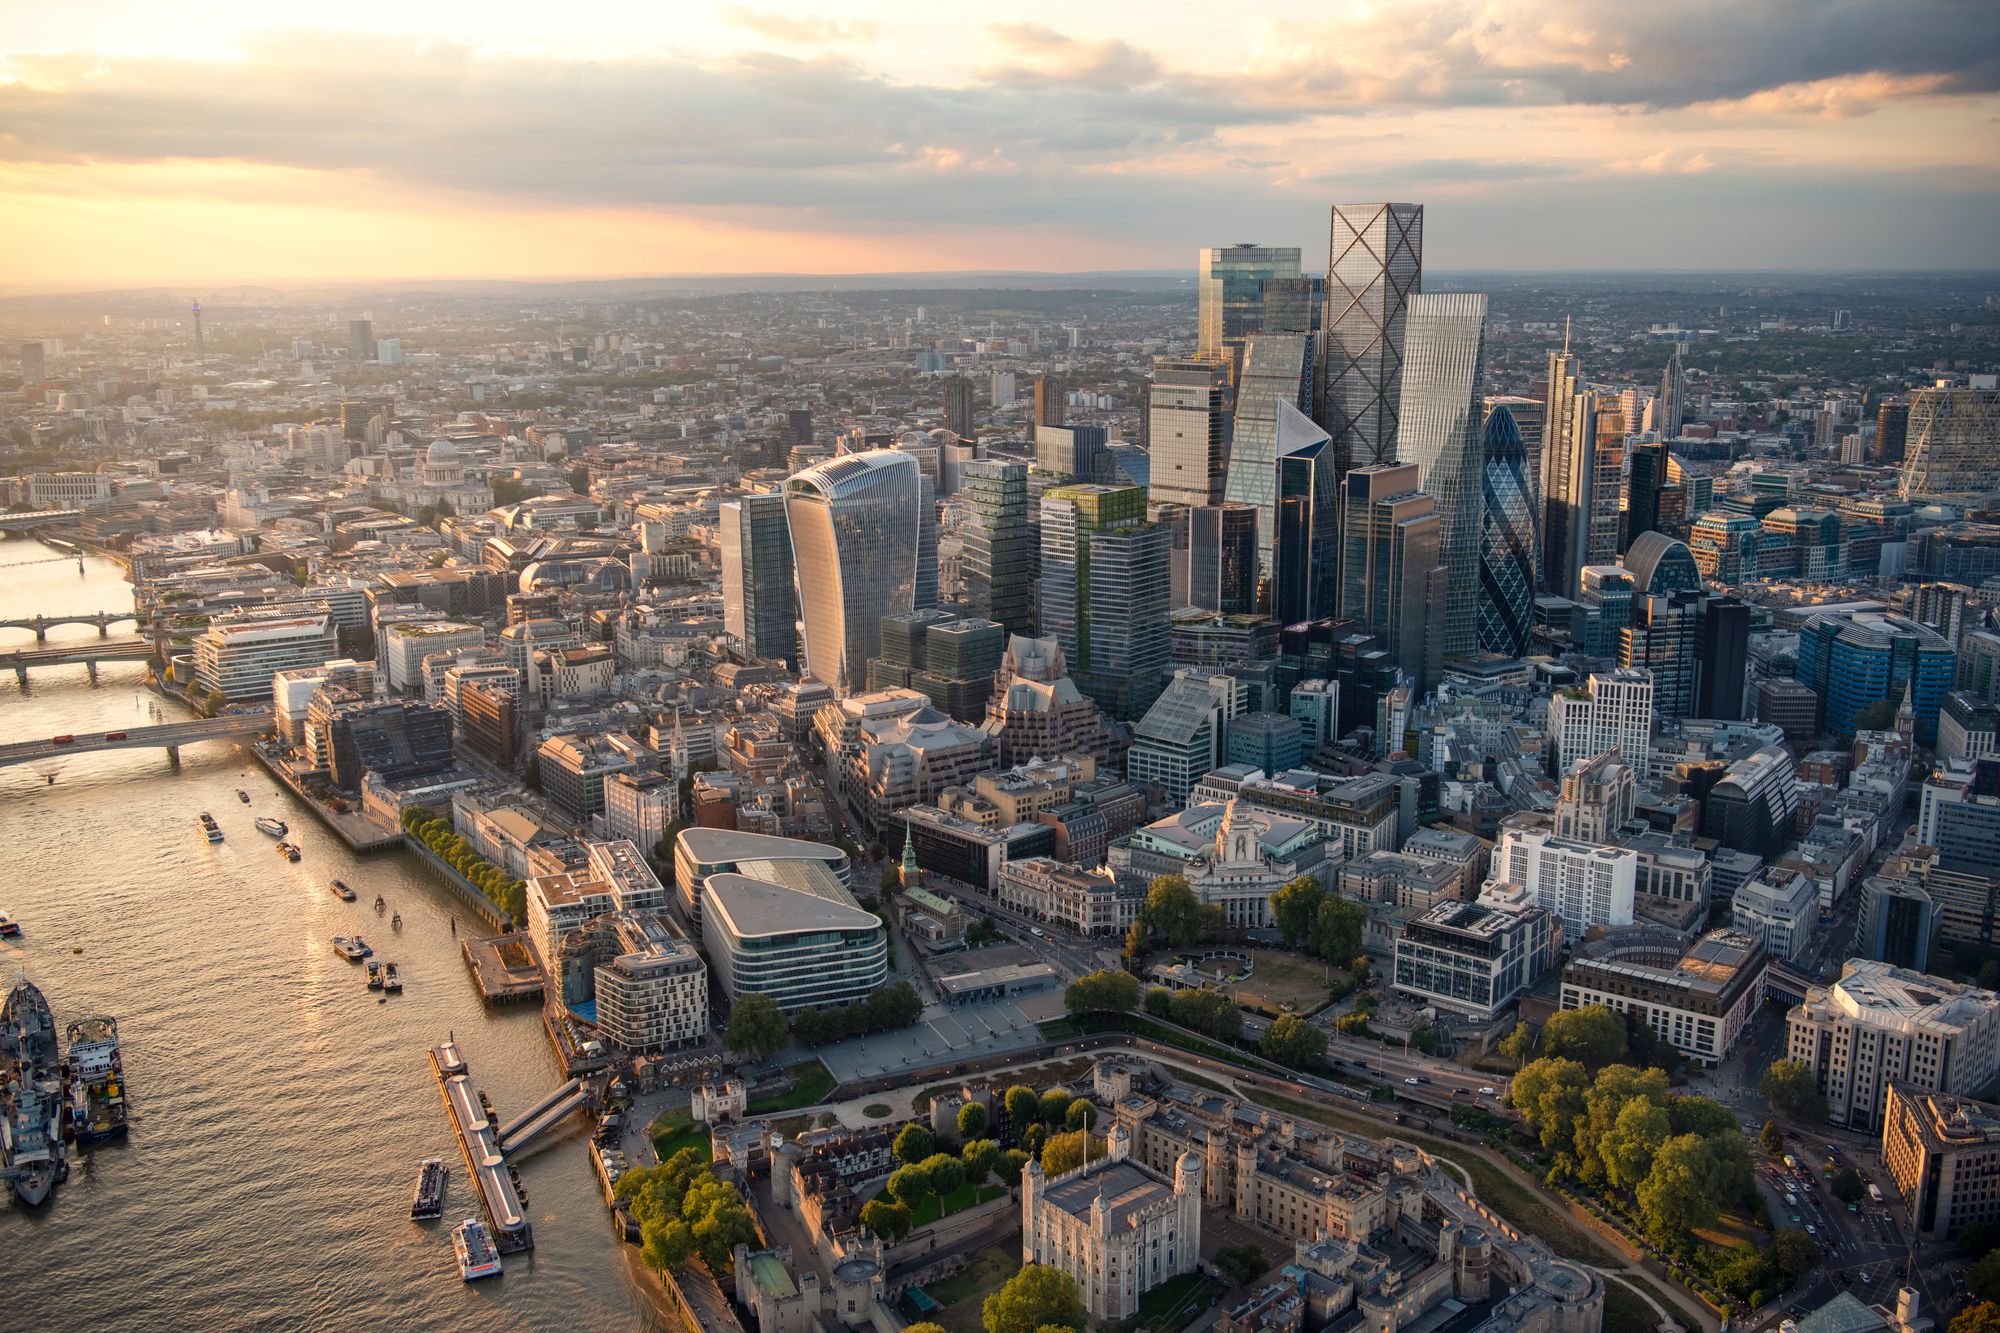 london to become 'manhattan-on-thames' with 600 more skyscrapers in pipeline